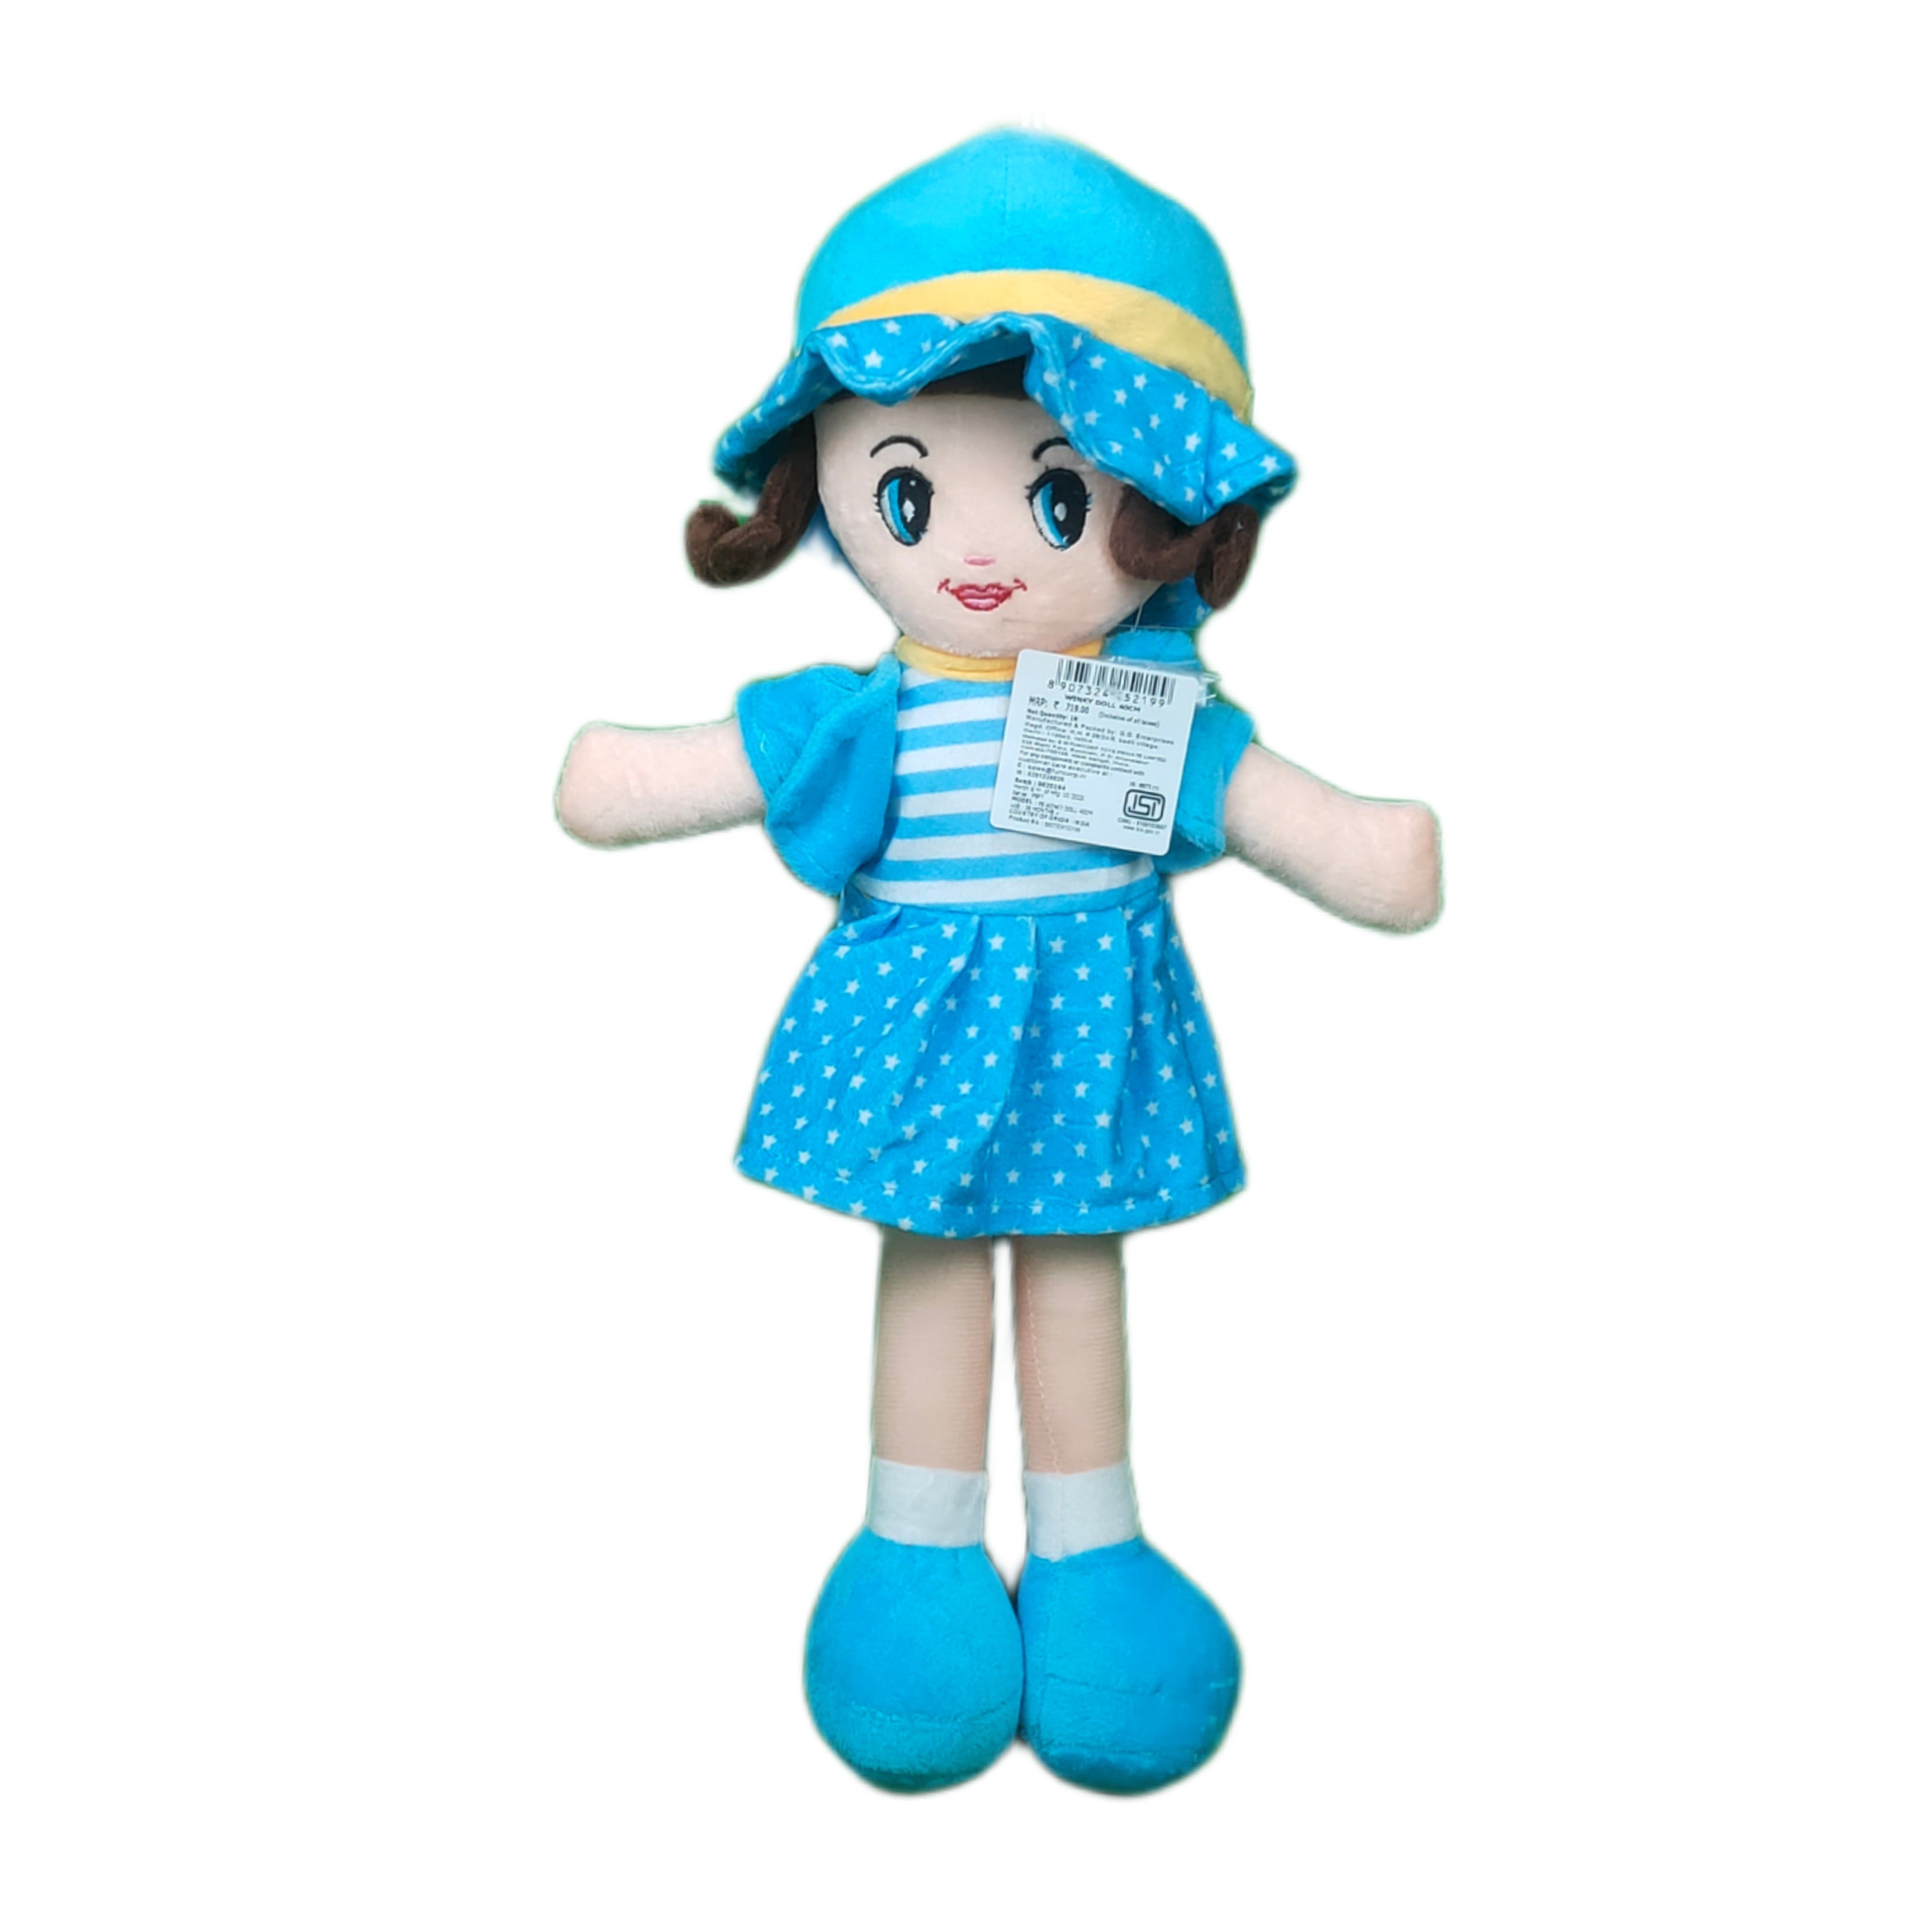 Play Hour Winky Rag Doll Plush Soft Toy Wearing Sky Dress for Ages 3 Years and Up, 40cm